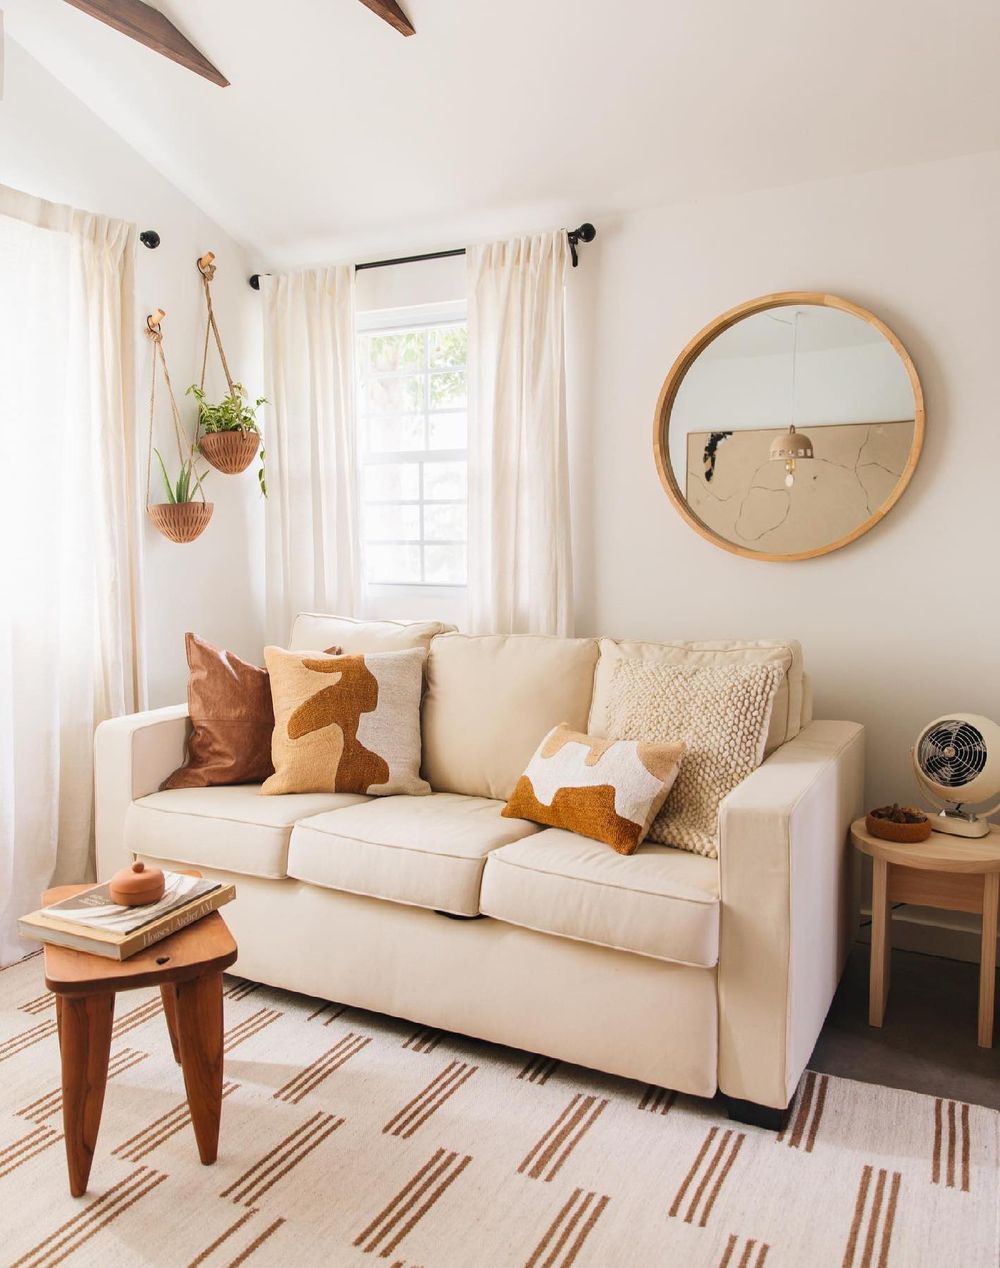 3 Ways To Have More Appealing Cheap Home Decor Stores